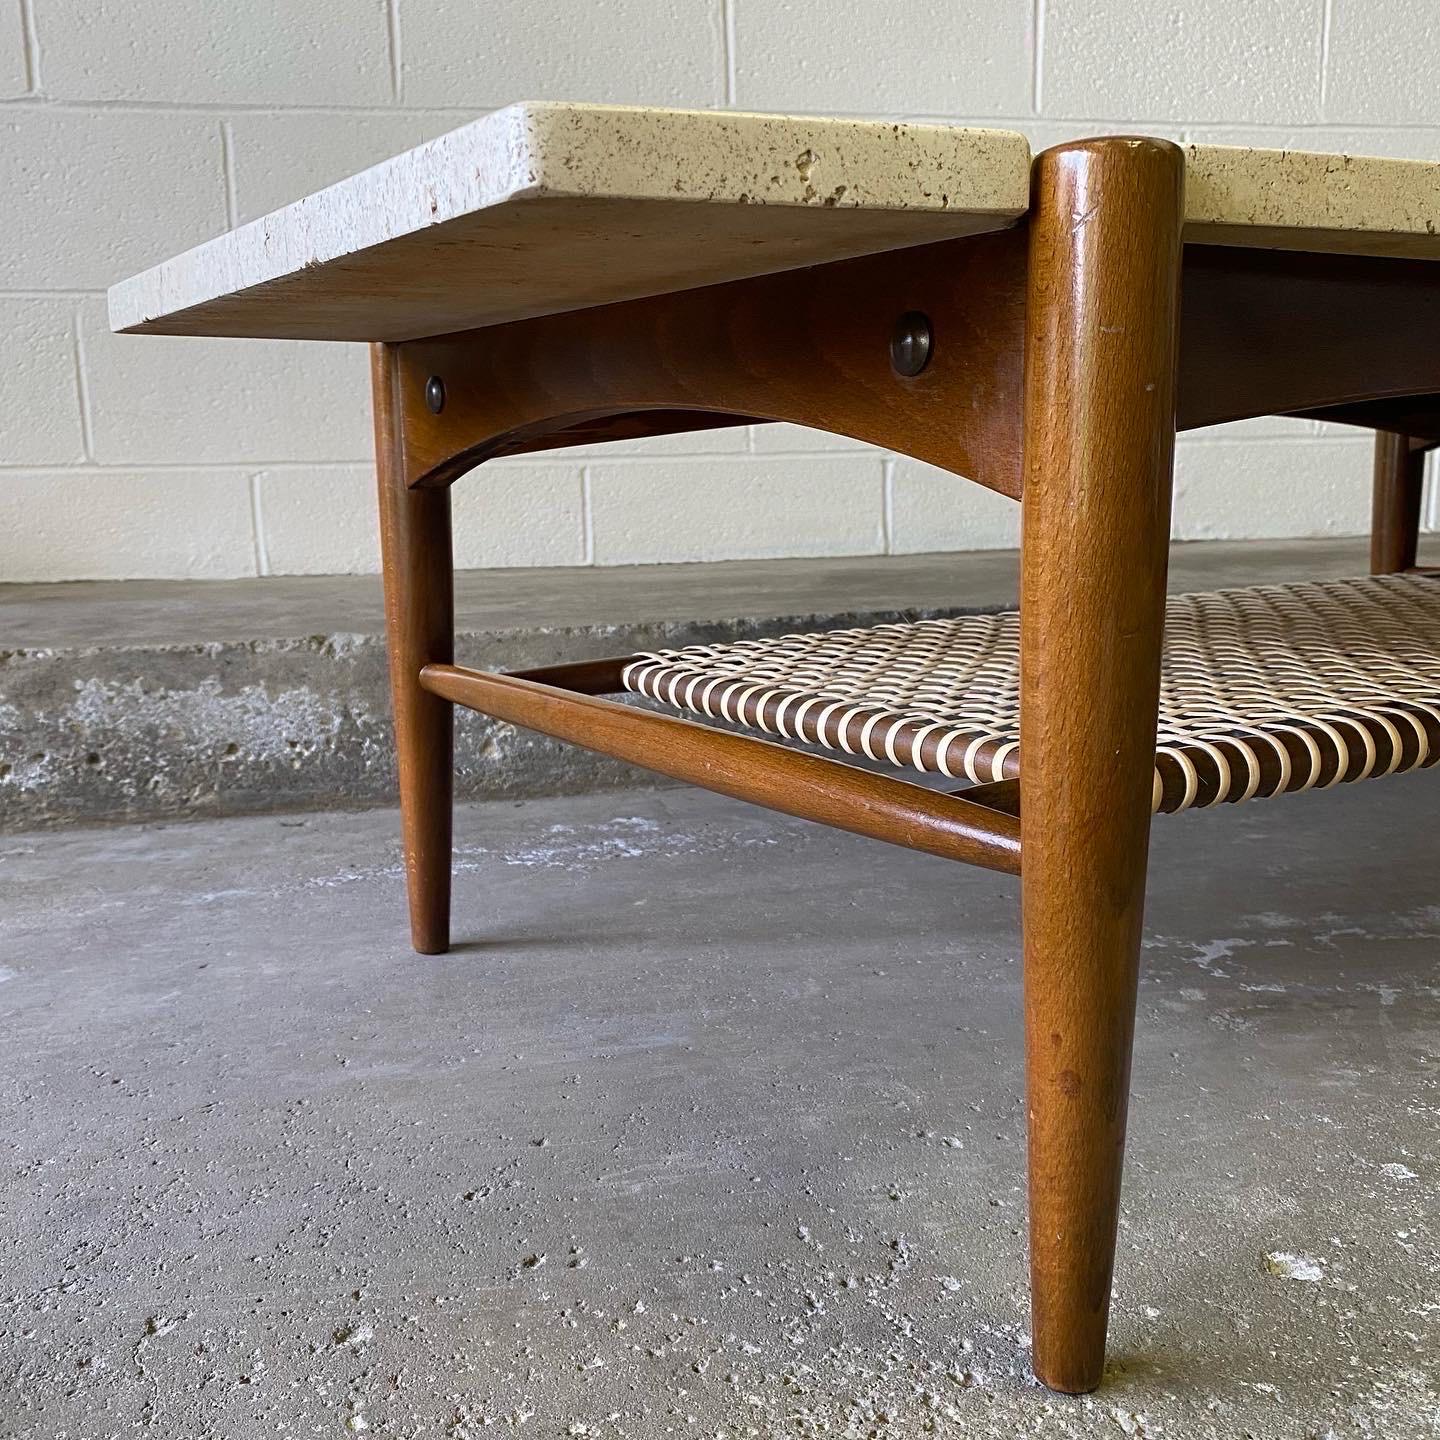 This is an excellent Danish modern coffee table designed by Folke Ohlsson for Dux of Sweden in the 1960’s. It features beautiful sculpted walnut with a solid travertine top, new, professionally installed cane, and brass detail. It’s subtle yet